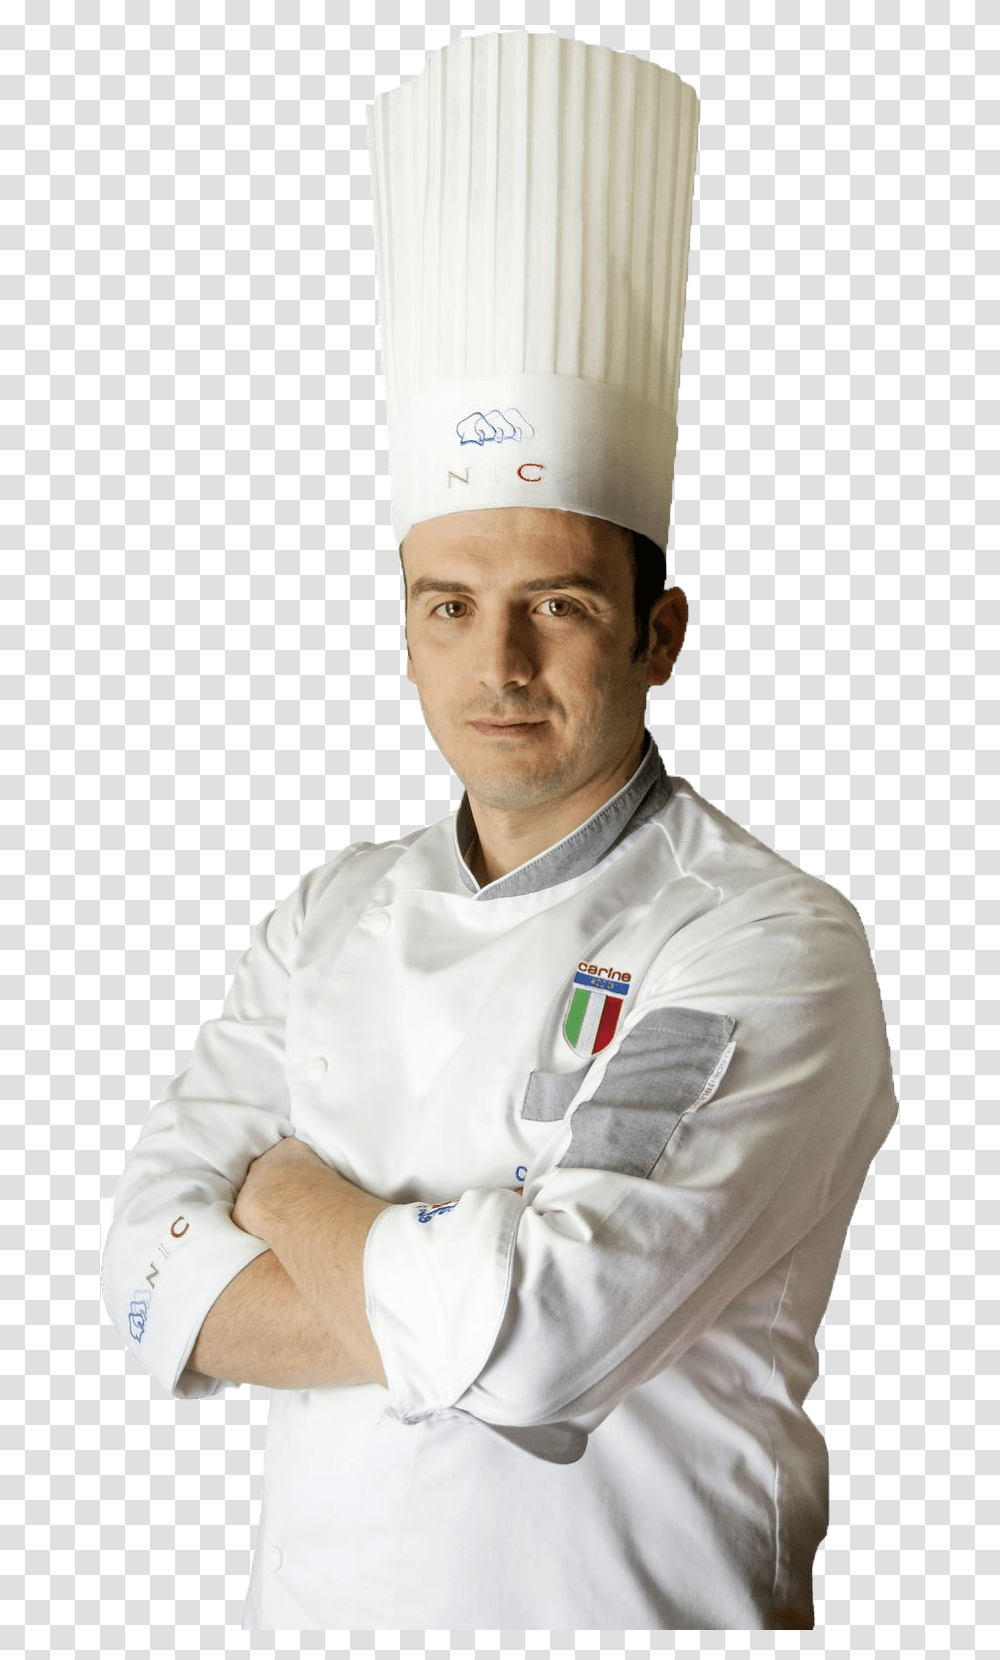 Chef Free 5 Star Restaurant Chef, Person, Human, Shirt Transparent Png